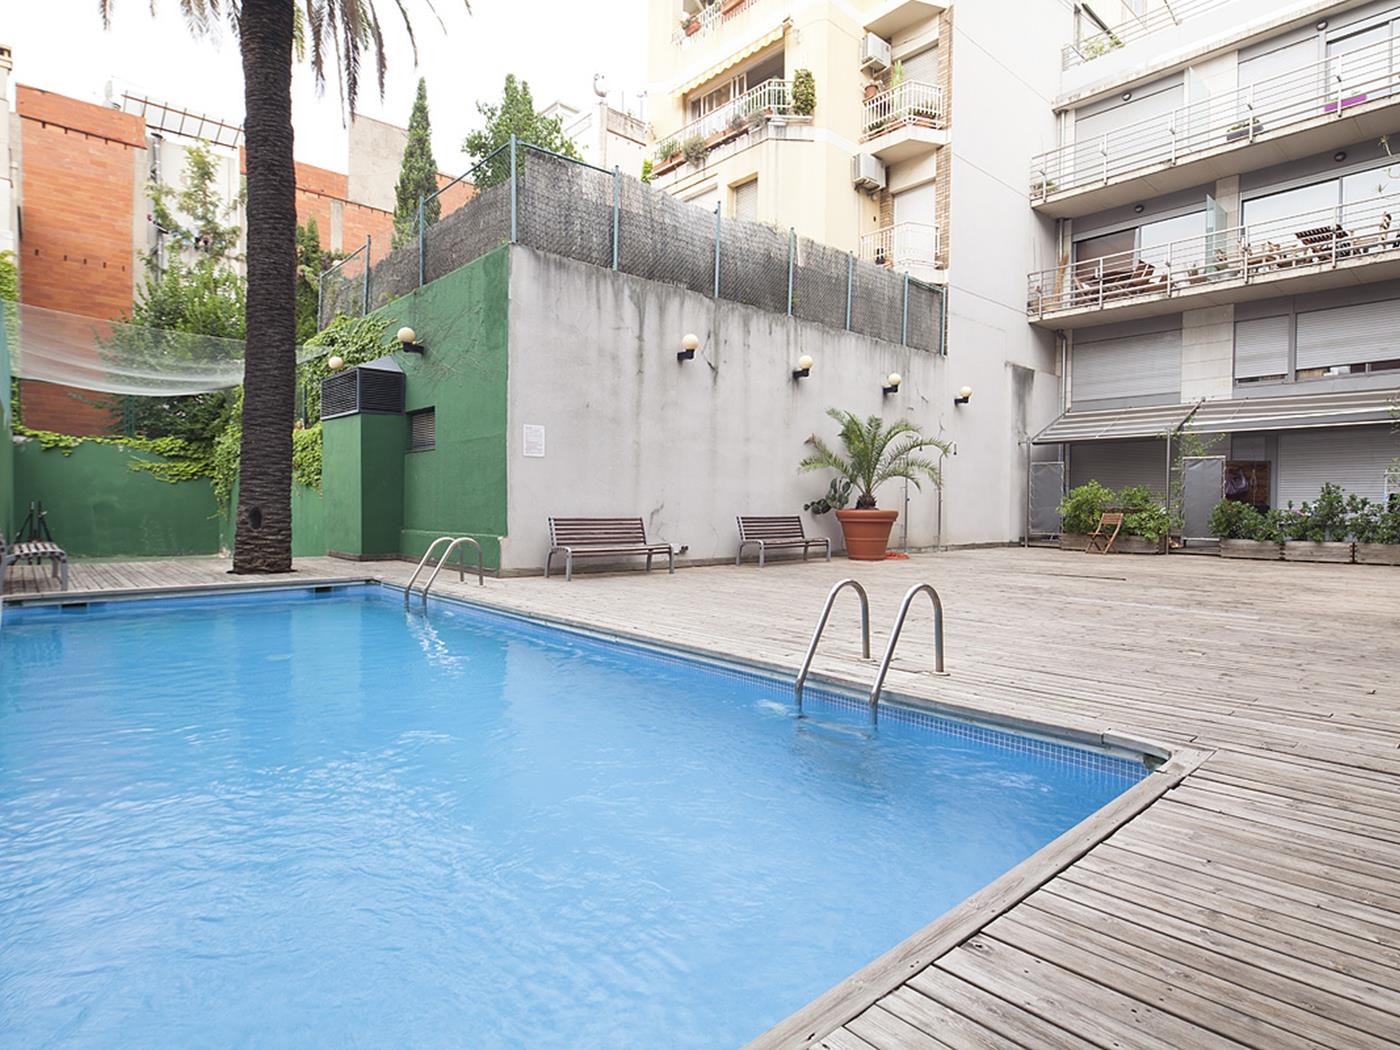 Flat in the Putxet area in Barcelona Center for long term rentals for 8 - My Space Barcelona Apartments